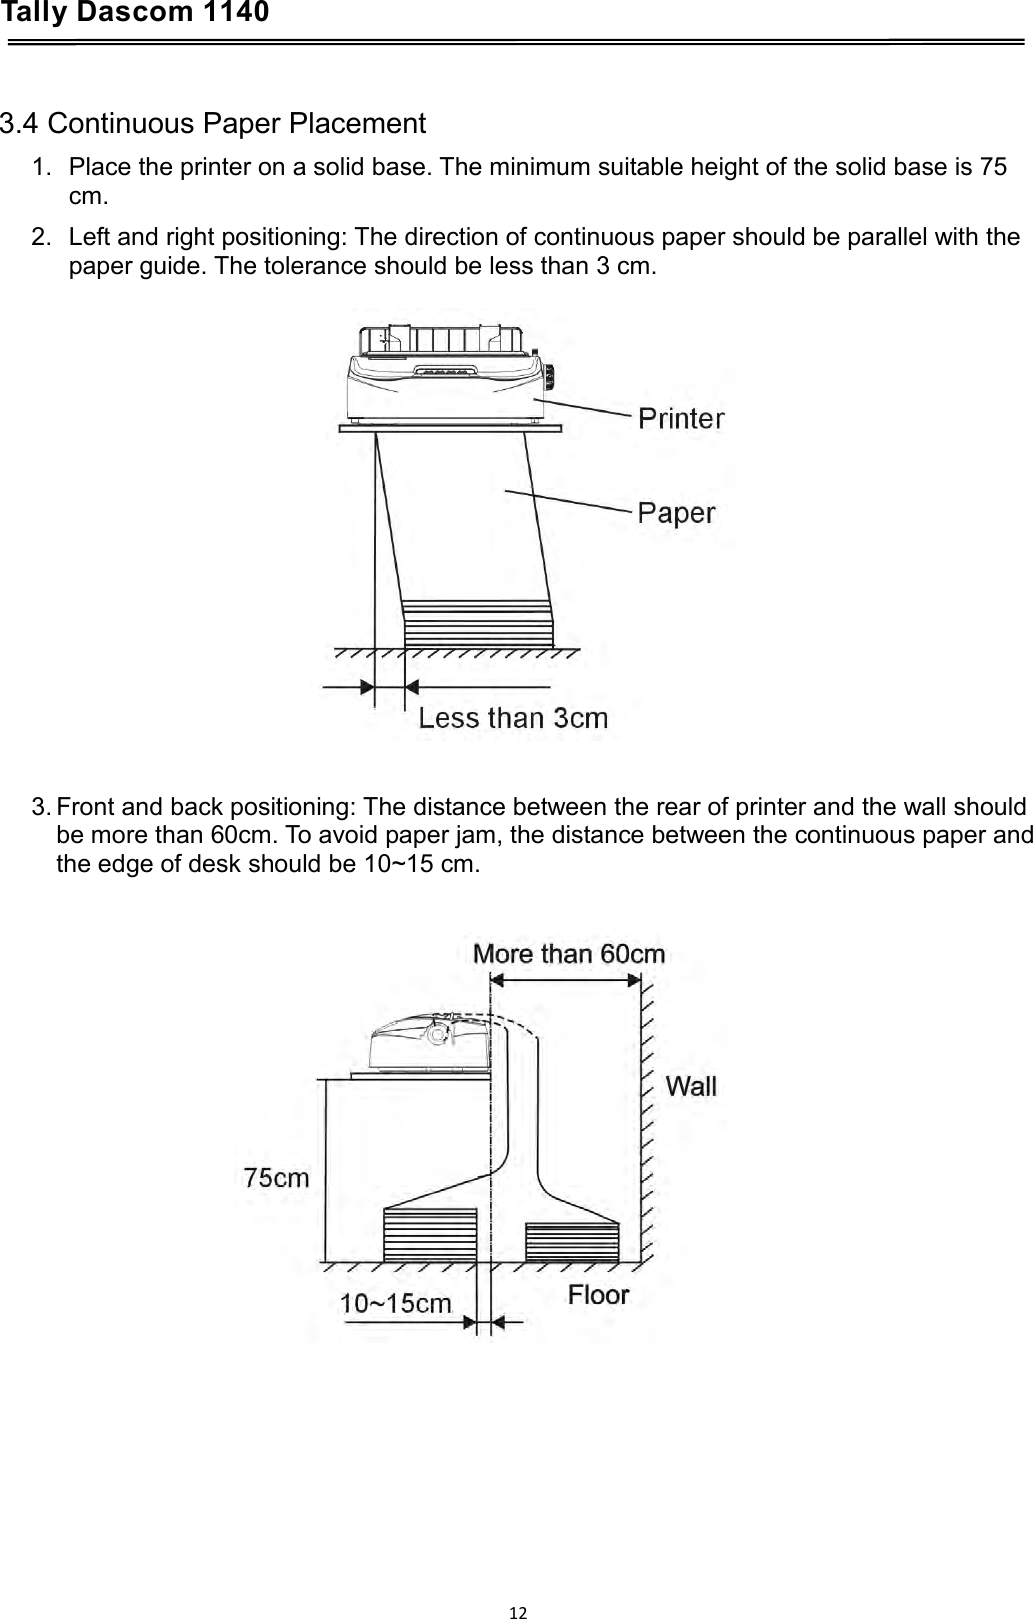 Tally Dascom 1140    3.4 Continuous Paper Placement 1. Place the printer on a solid base. The minimum suitable height of the solid base is 75 cm. 2. Left and right positioning: The direction of continuous paper should be parallel with the paper guide. The tolerance should be less than 3 cm.      3. Front and back positioning: The distance between the rear of printer and the wall should be more than 60cm. To avoid paper jam, the distance between the continuous paper and the edge of desk should be 10~15 cm.    12  